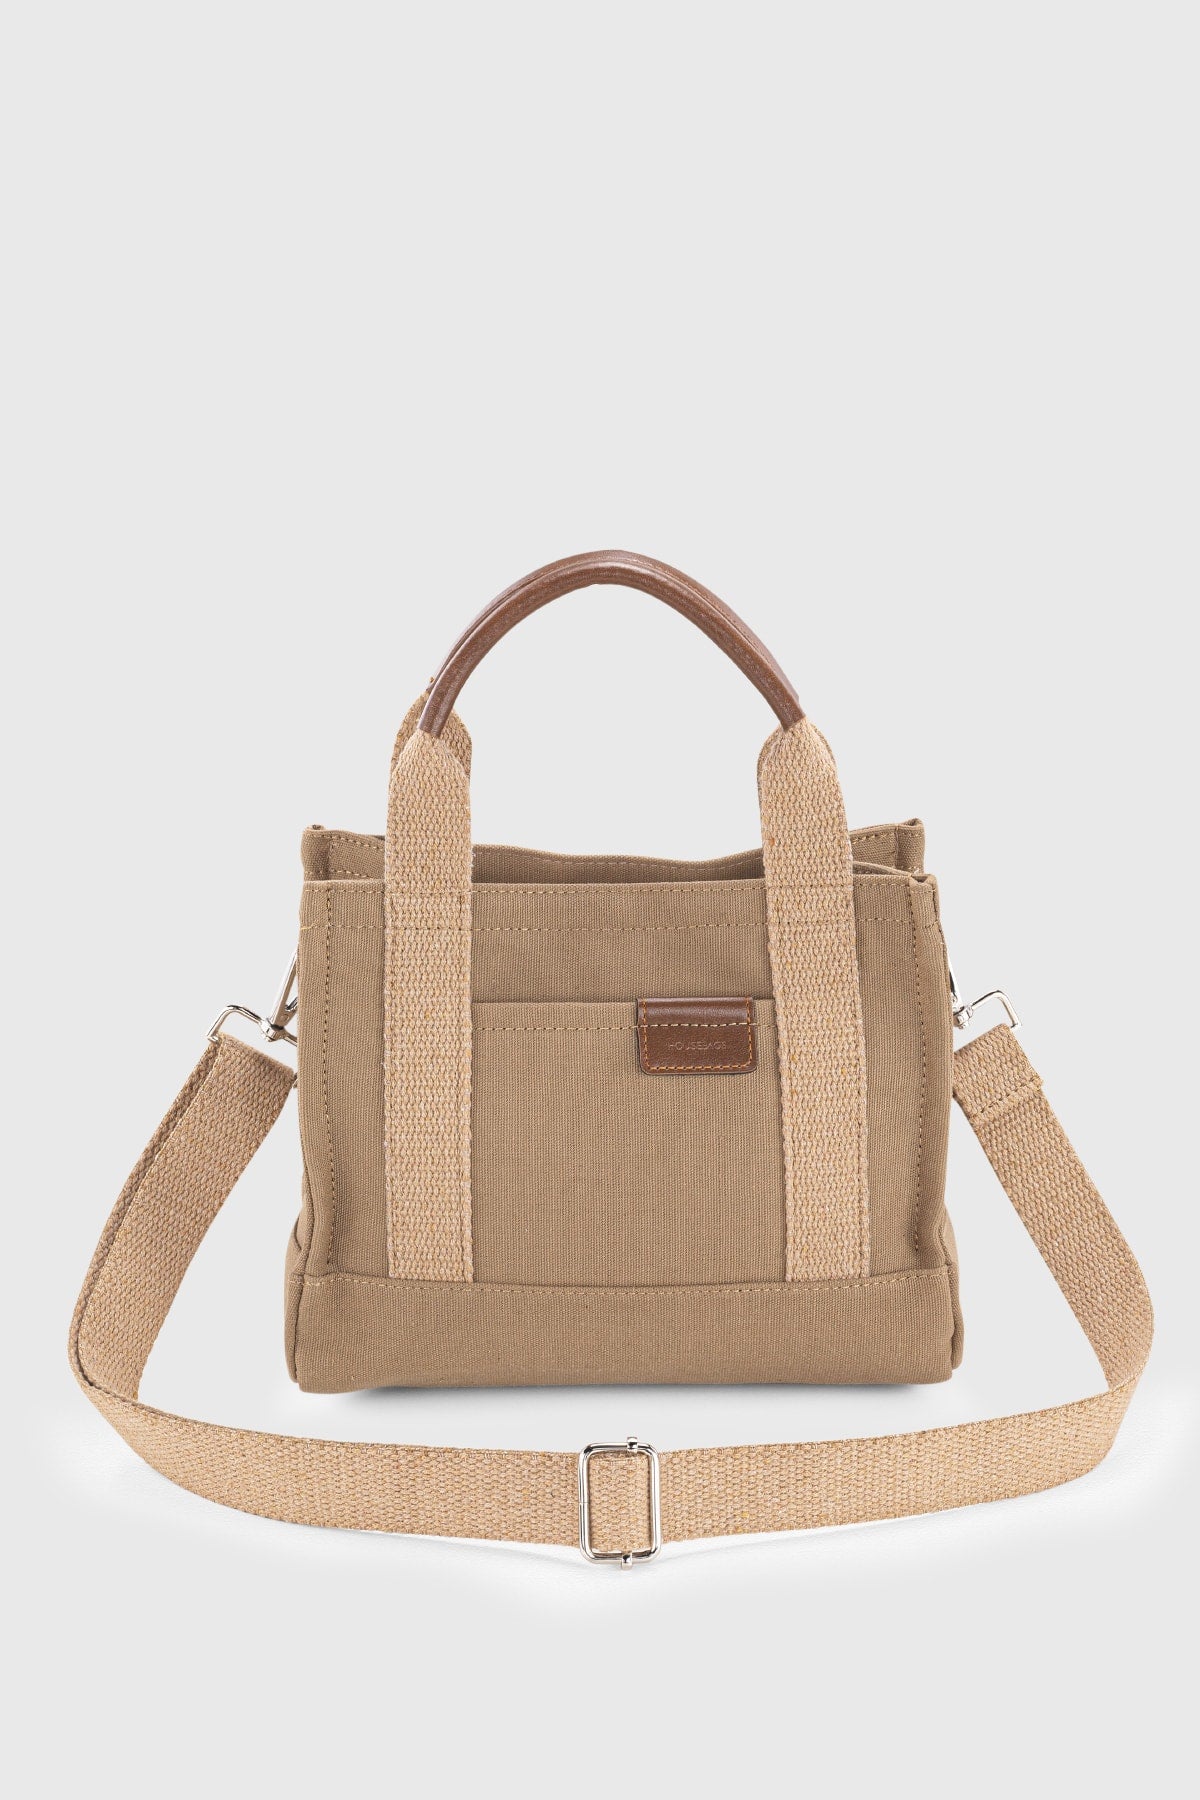 Women's Brown Canvas Tote Bag 232